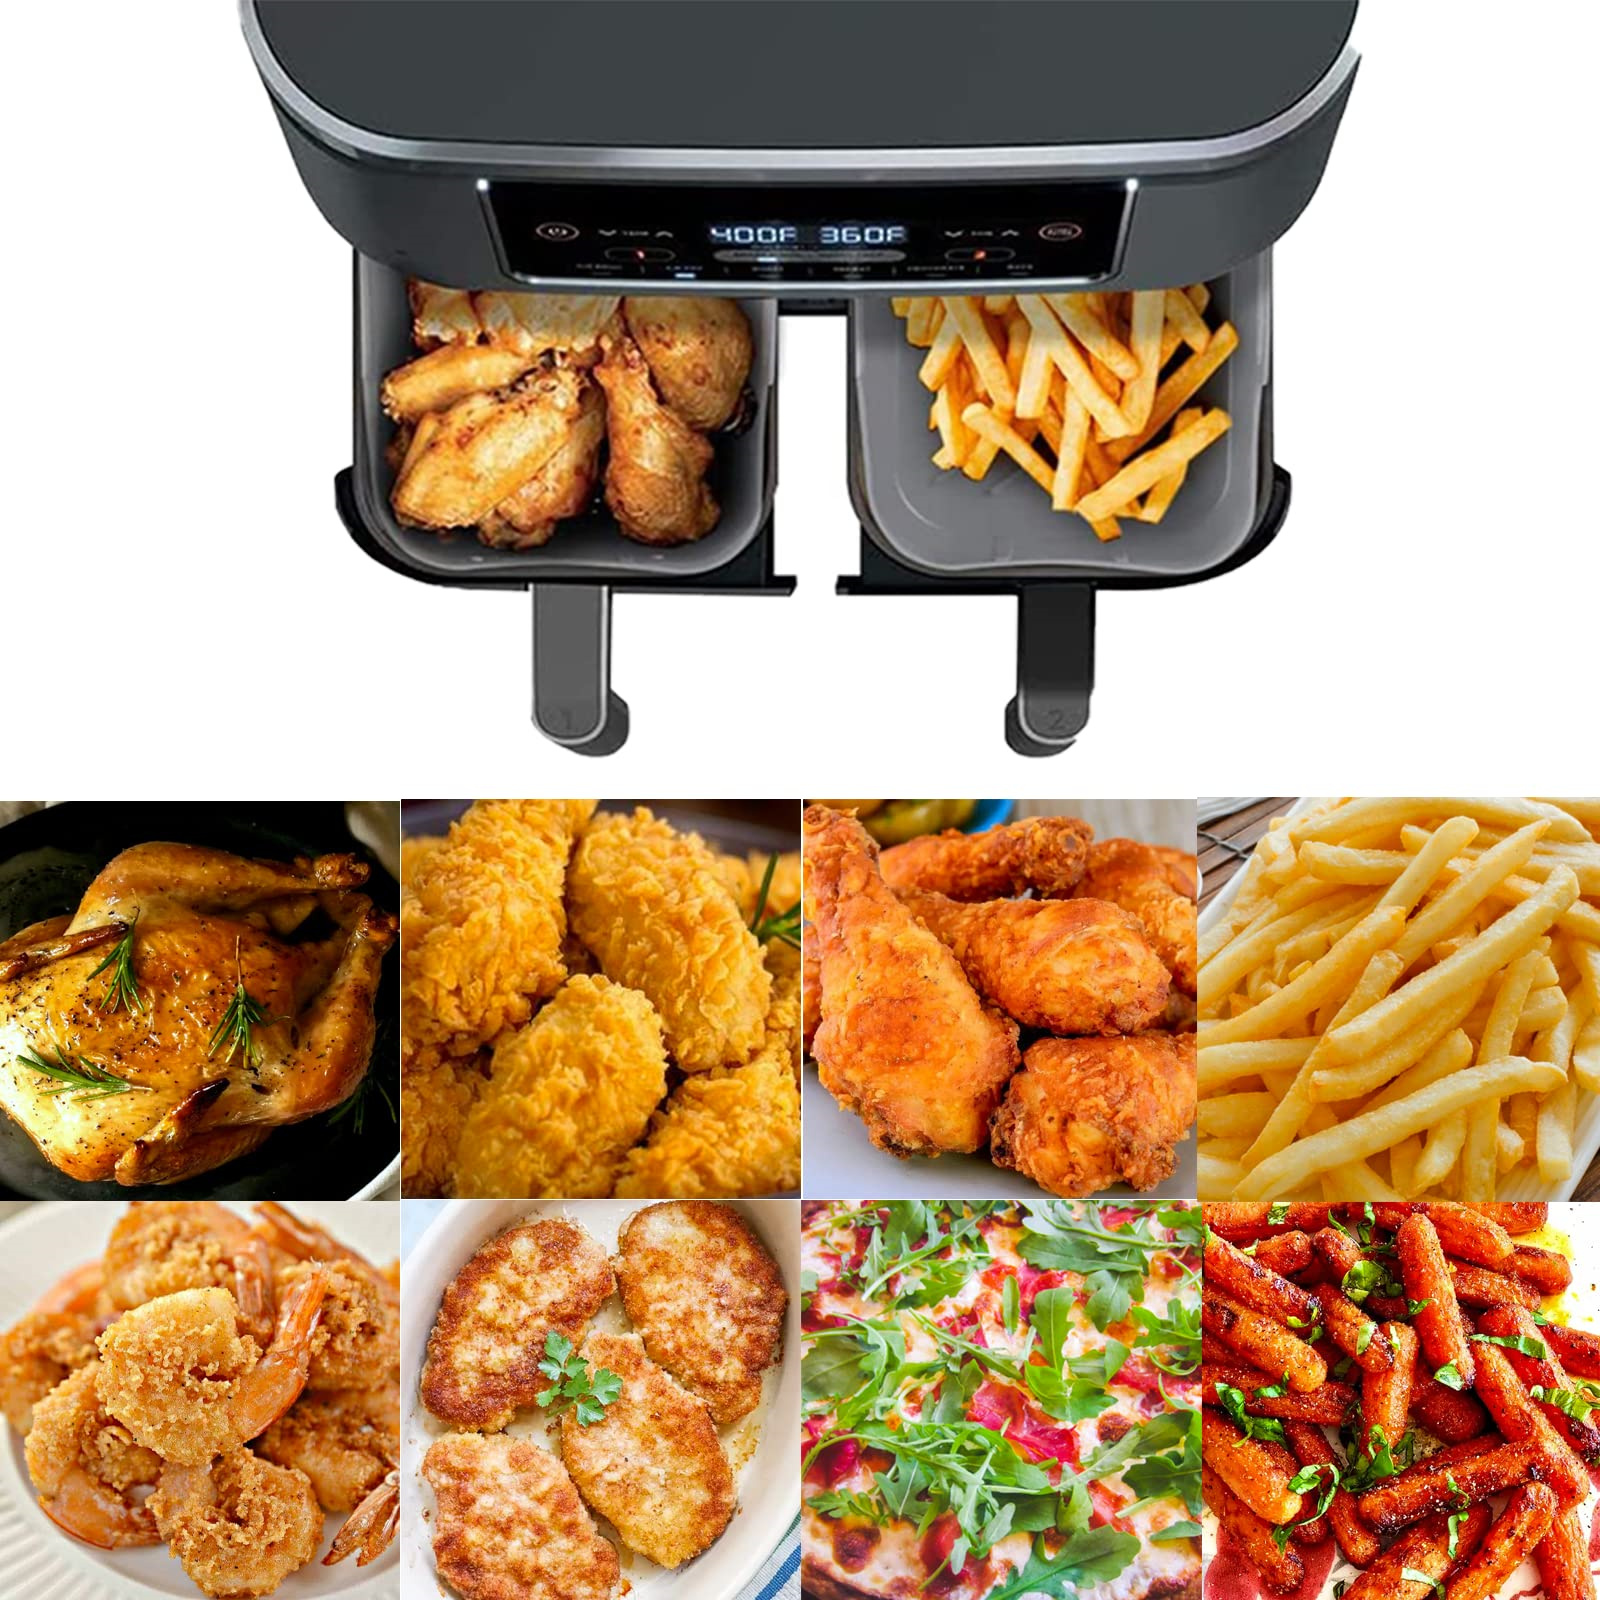 Golden Associate Silicone Liners Rectangular 2 Pcs for 6 to 8 Qt Air Fryer  Dual, 2 Basket Airfryer Rectangle Reusable Baking Tray Fits Ninja Foodi